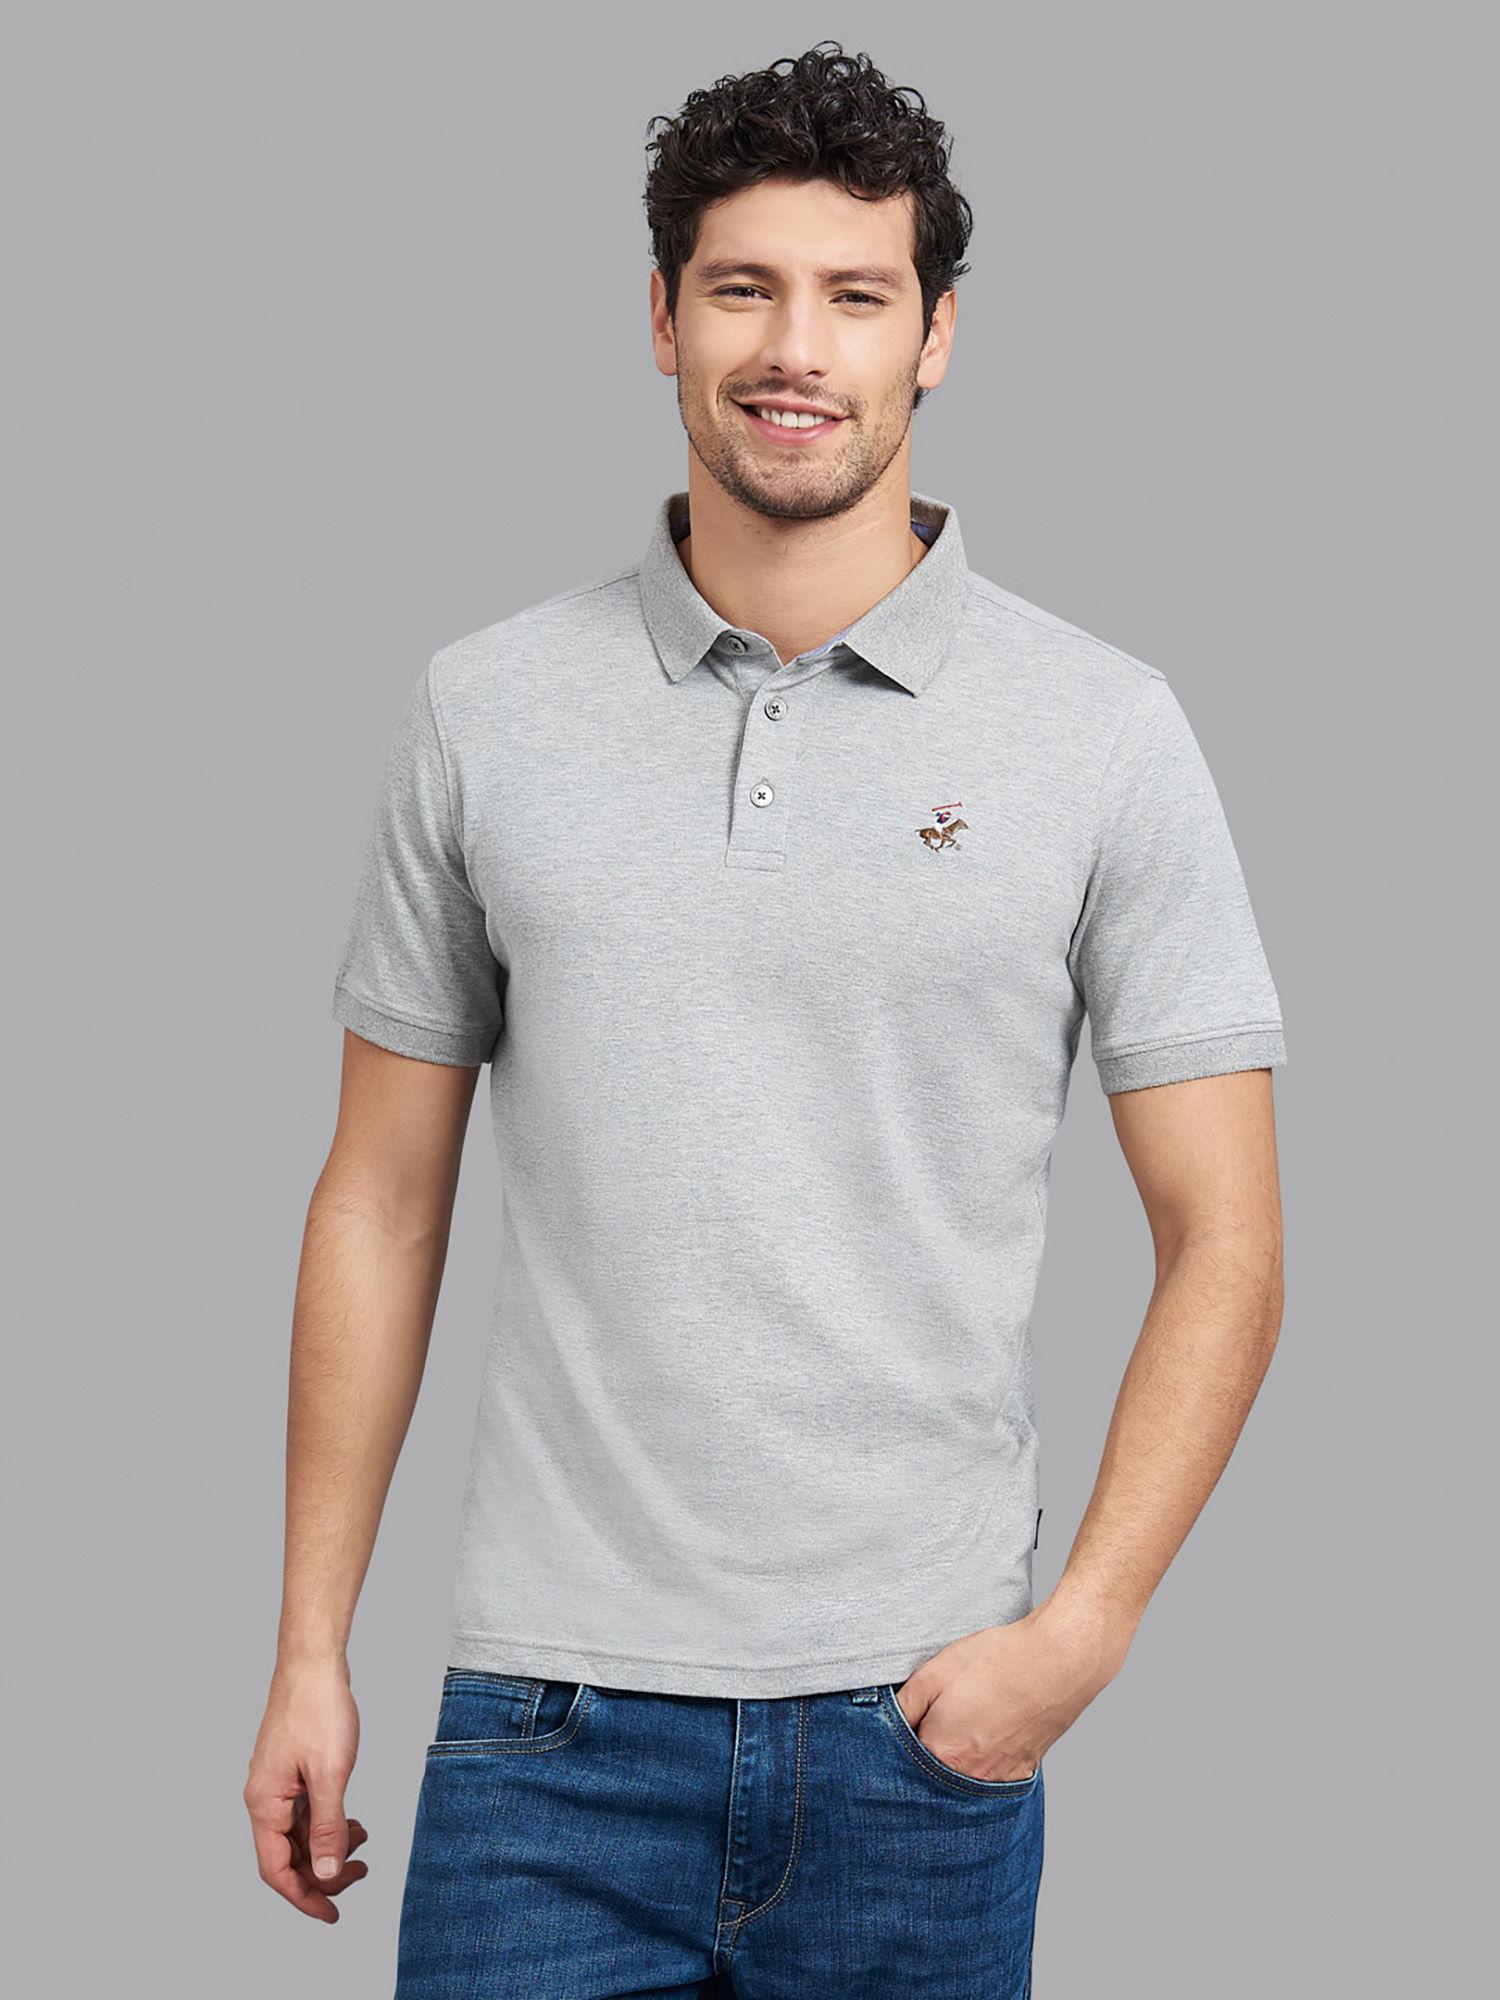 Easy With A Twist Stretch Pique Polo T-Shirt